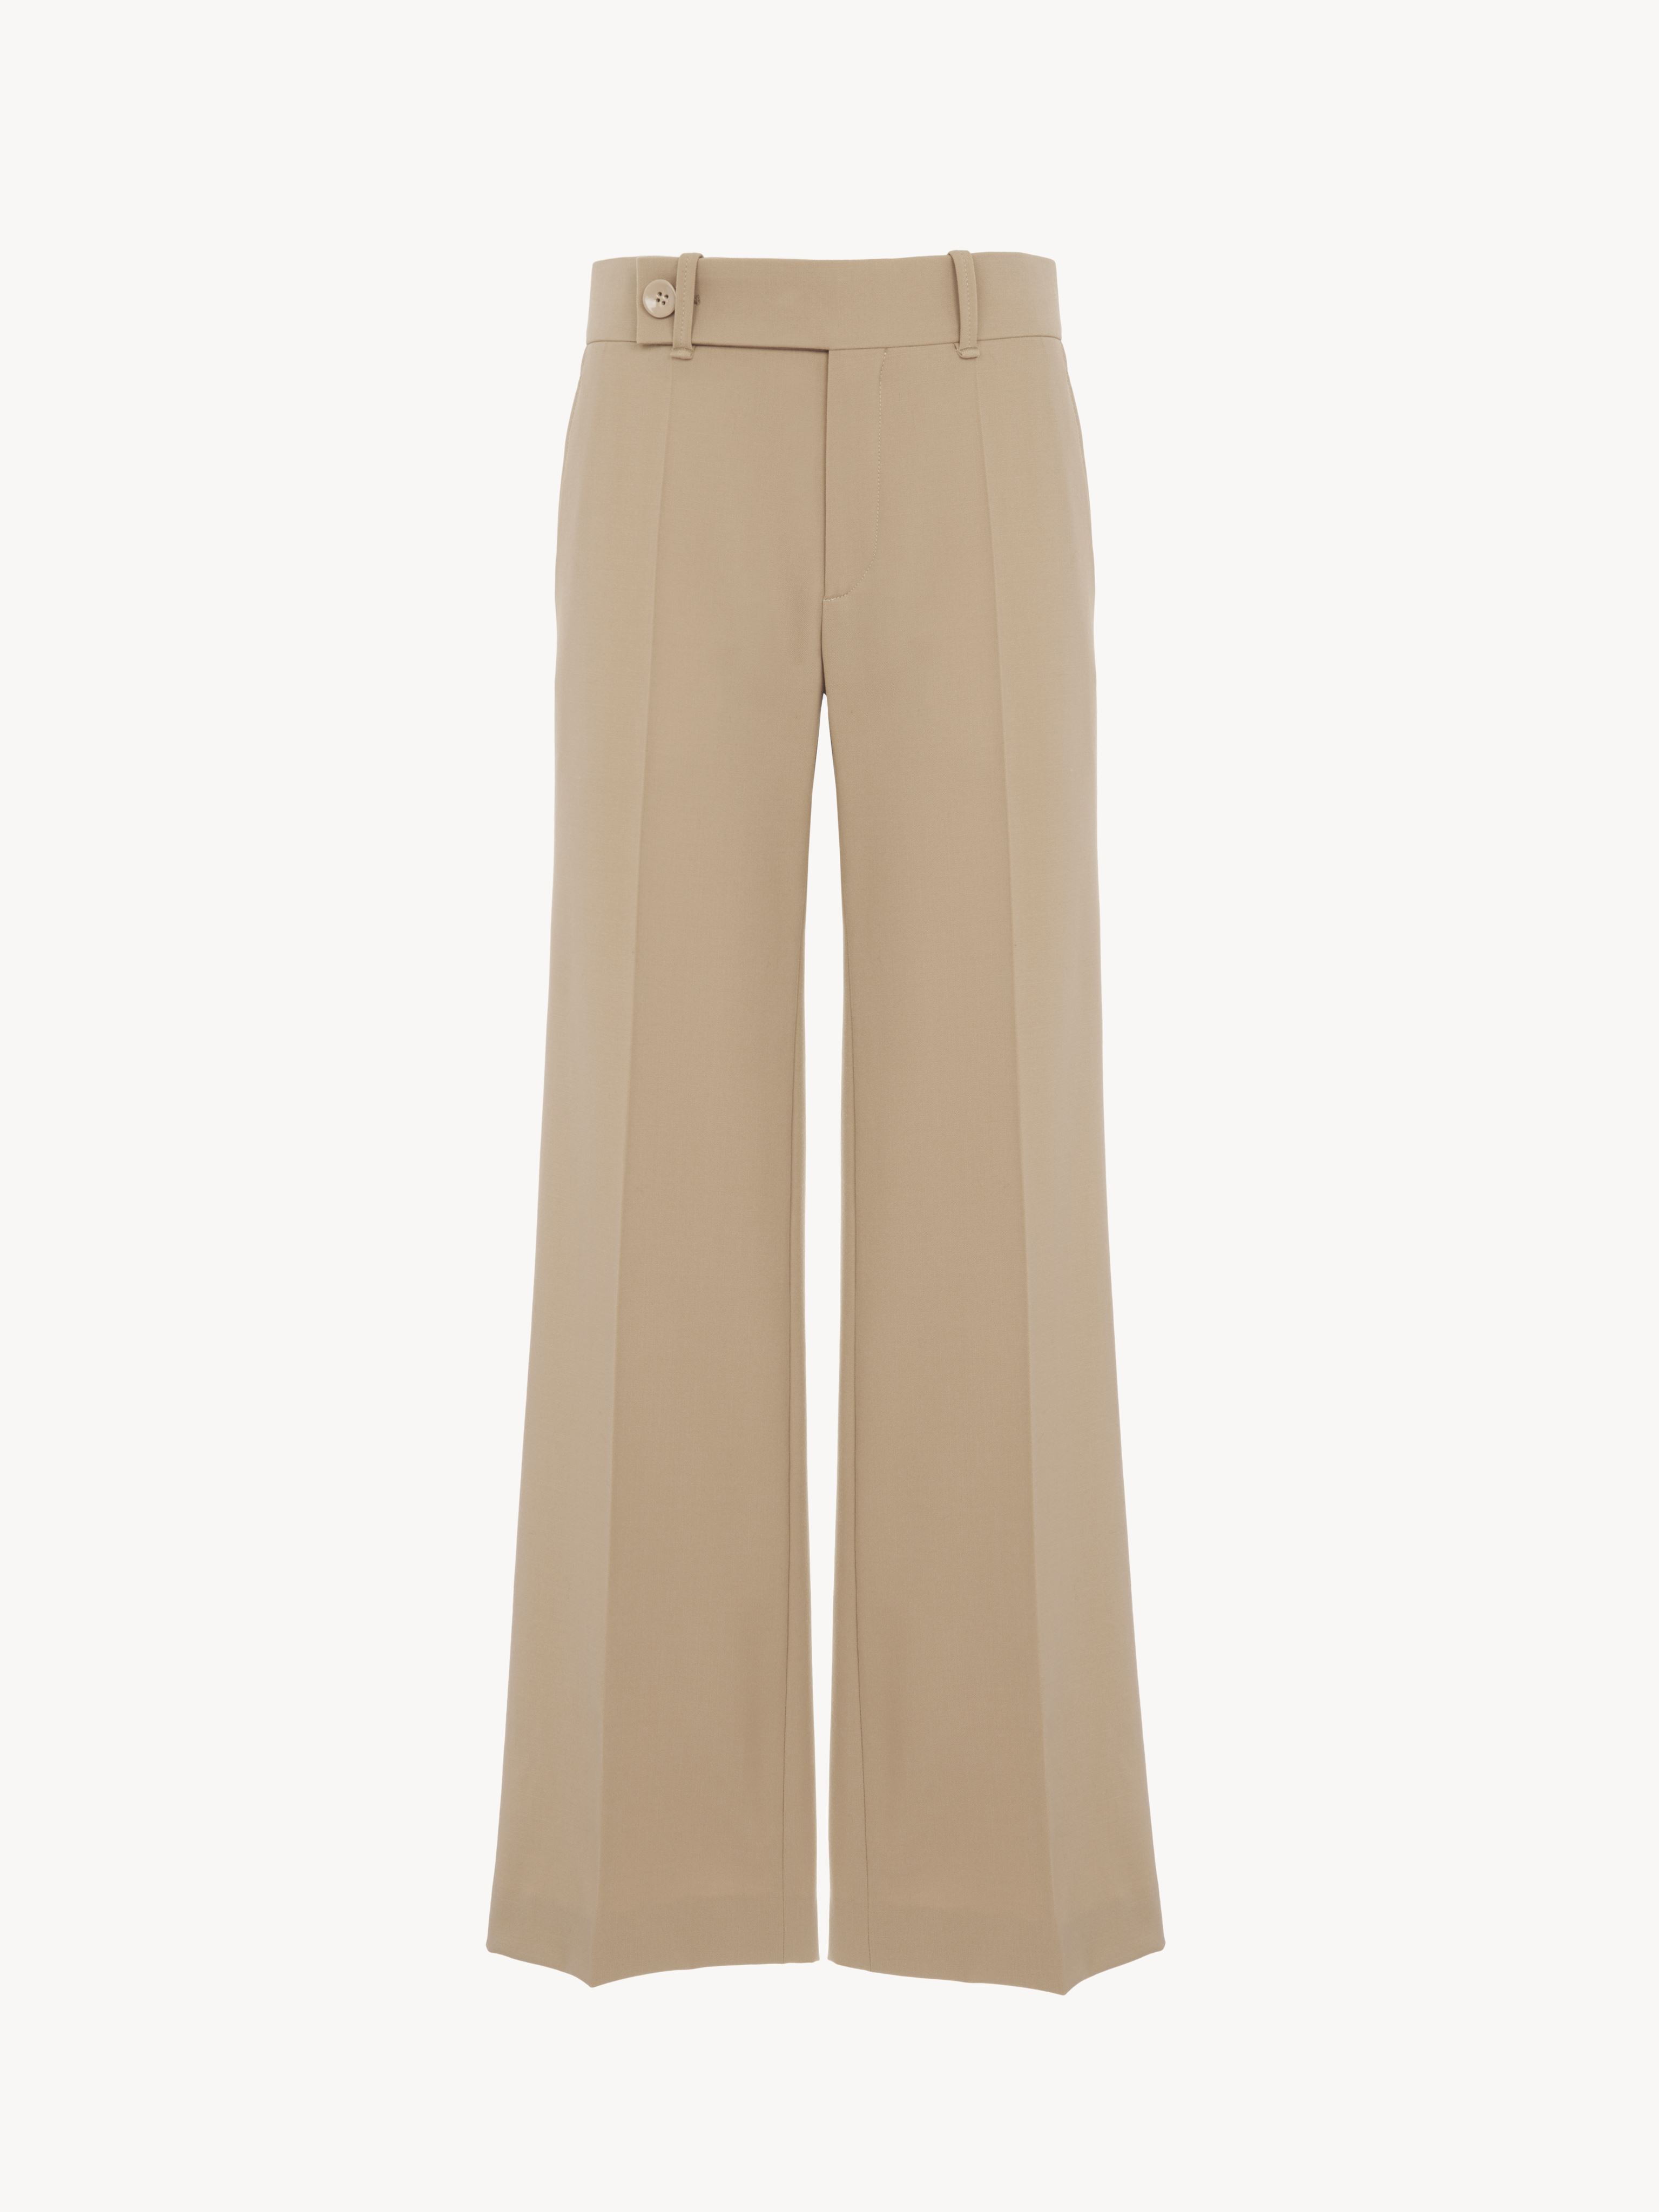 Chloé Beige Straight Tailored Trousers